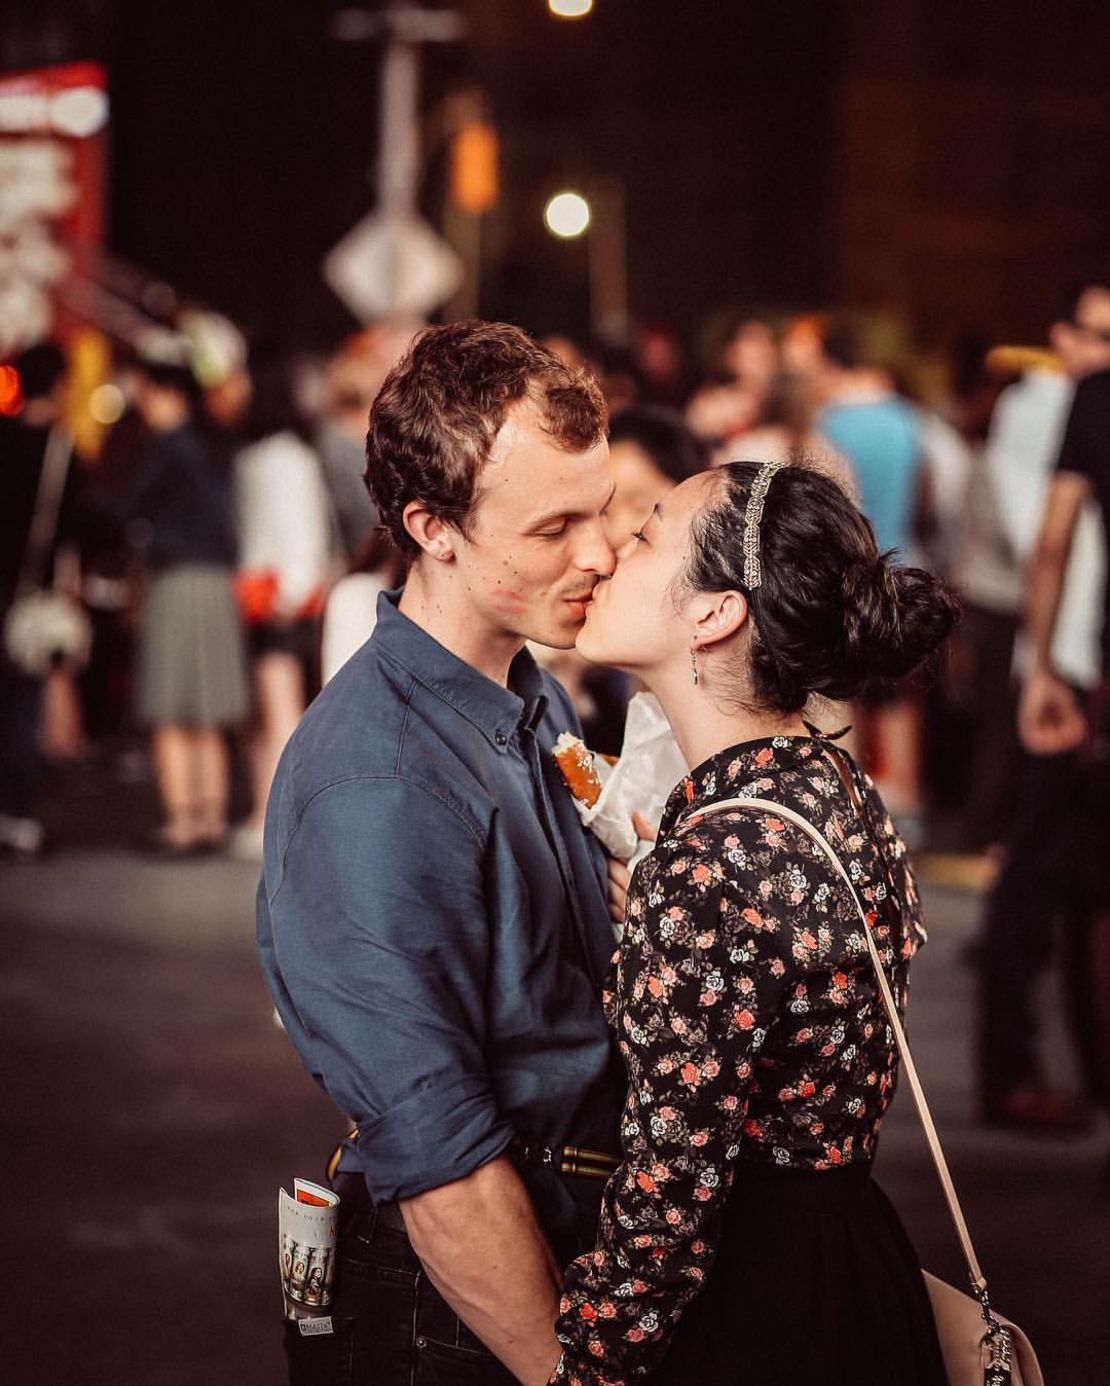 Griffin Madden and Saya Tomioka share an intimate moment last year in New York.